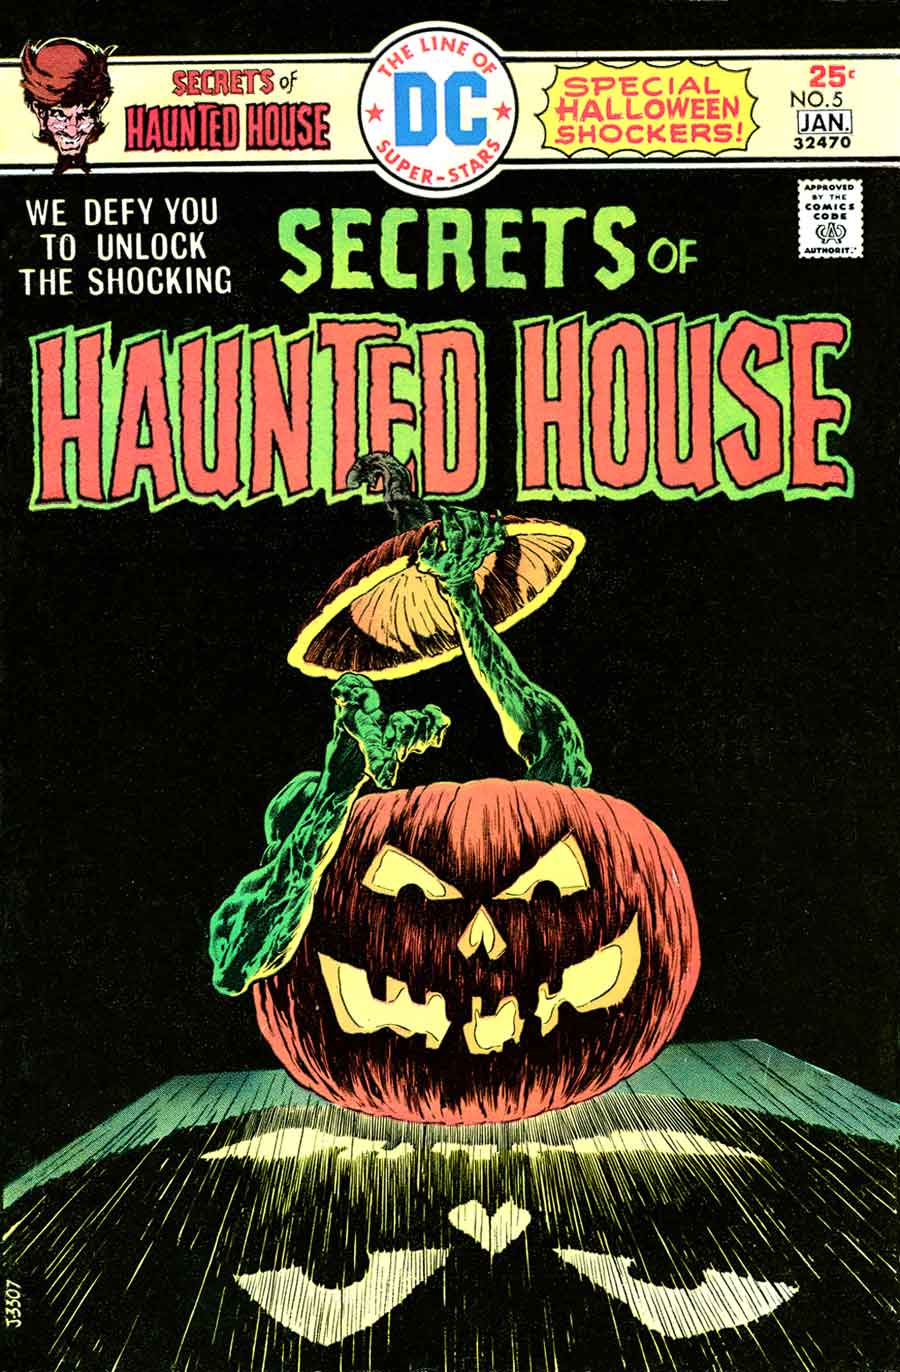 Secrets of Haunted House #5 bronze age dc horror comic book cover art by Bernie Wrightson